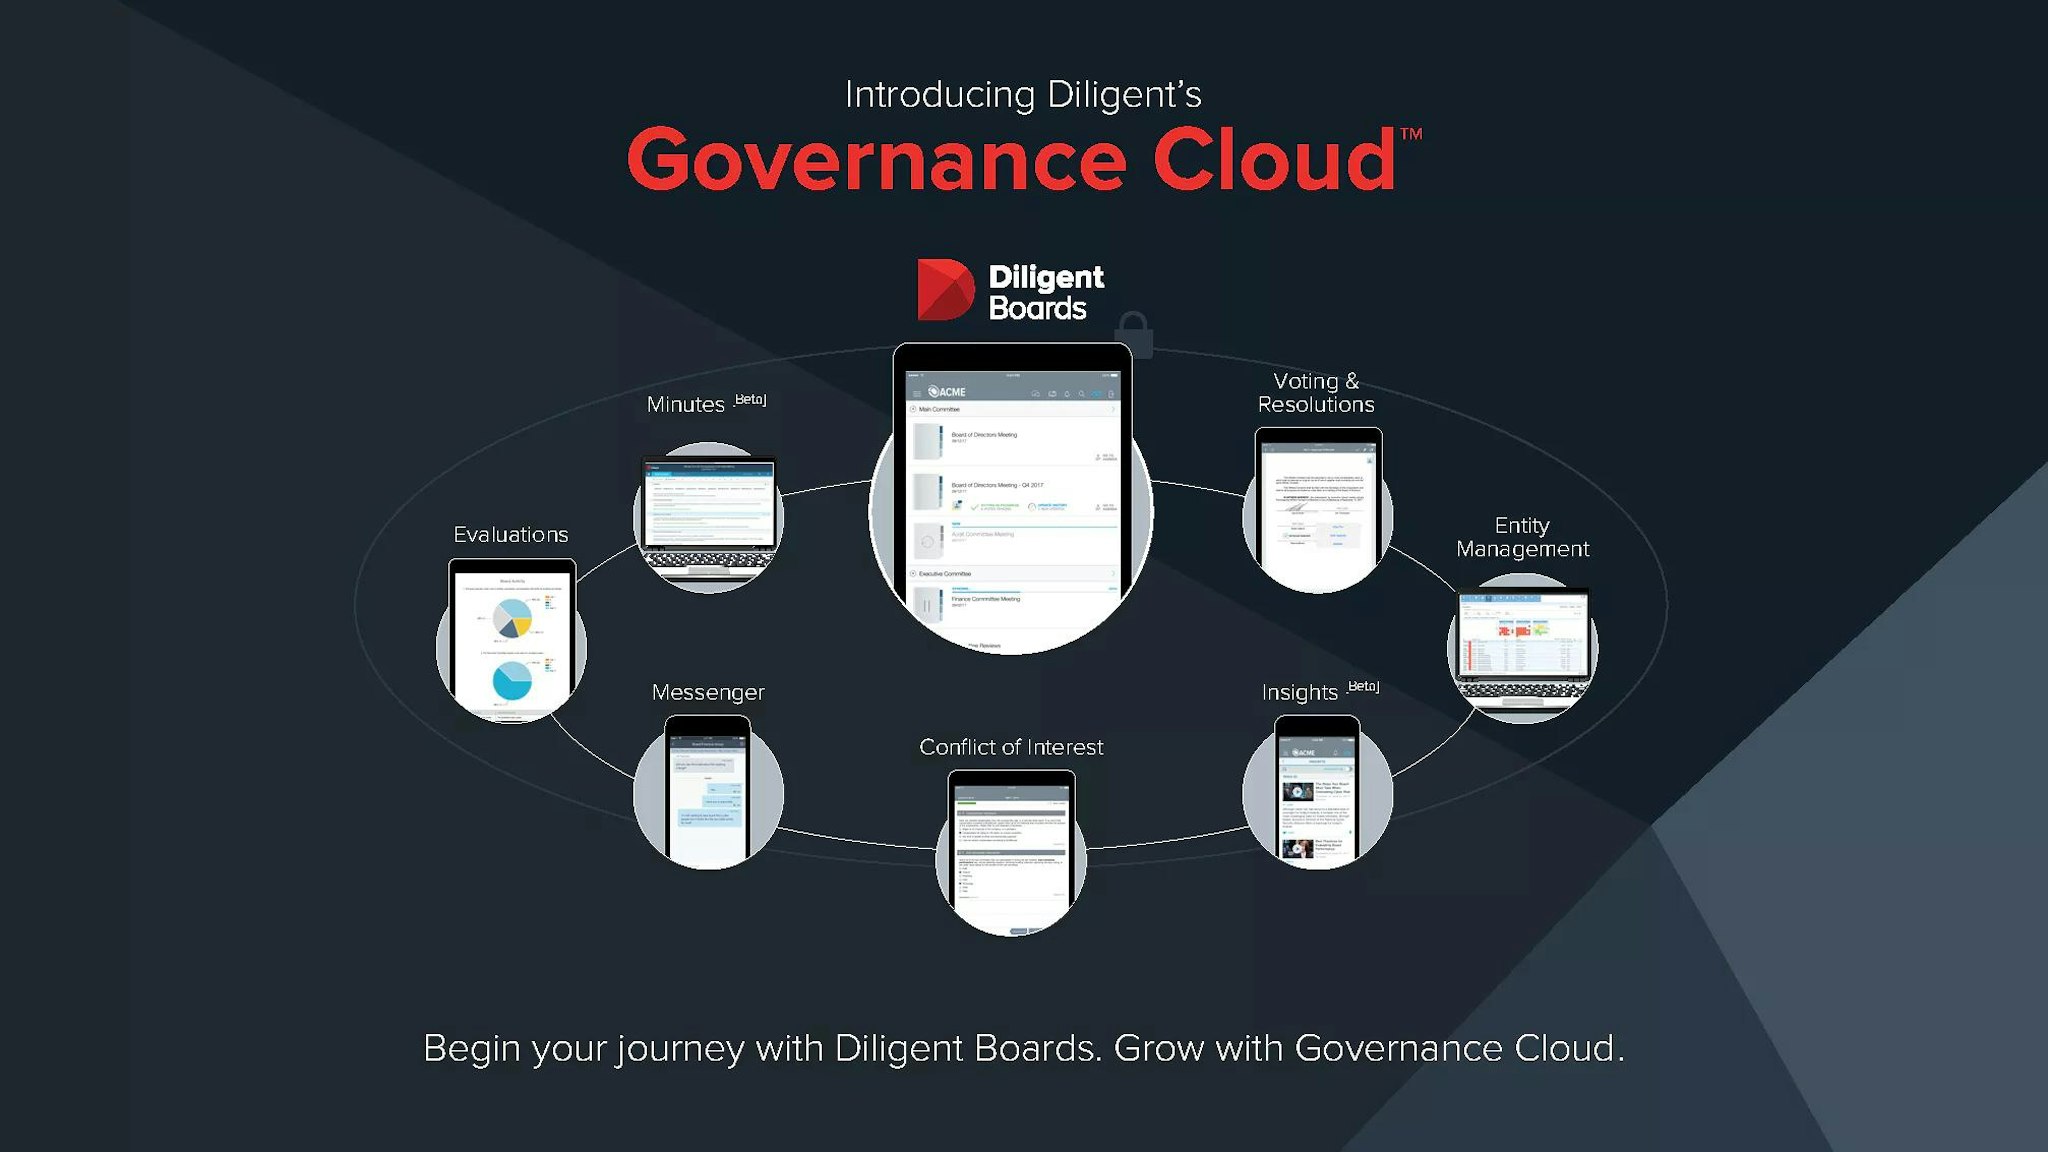 A representation of the different elements of Diligent's Governance Cloud